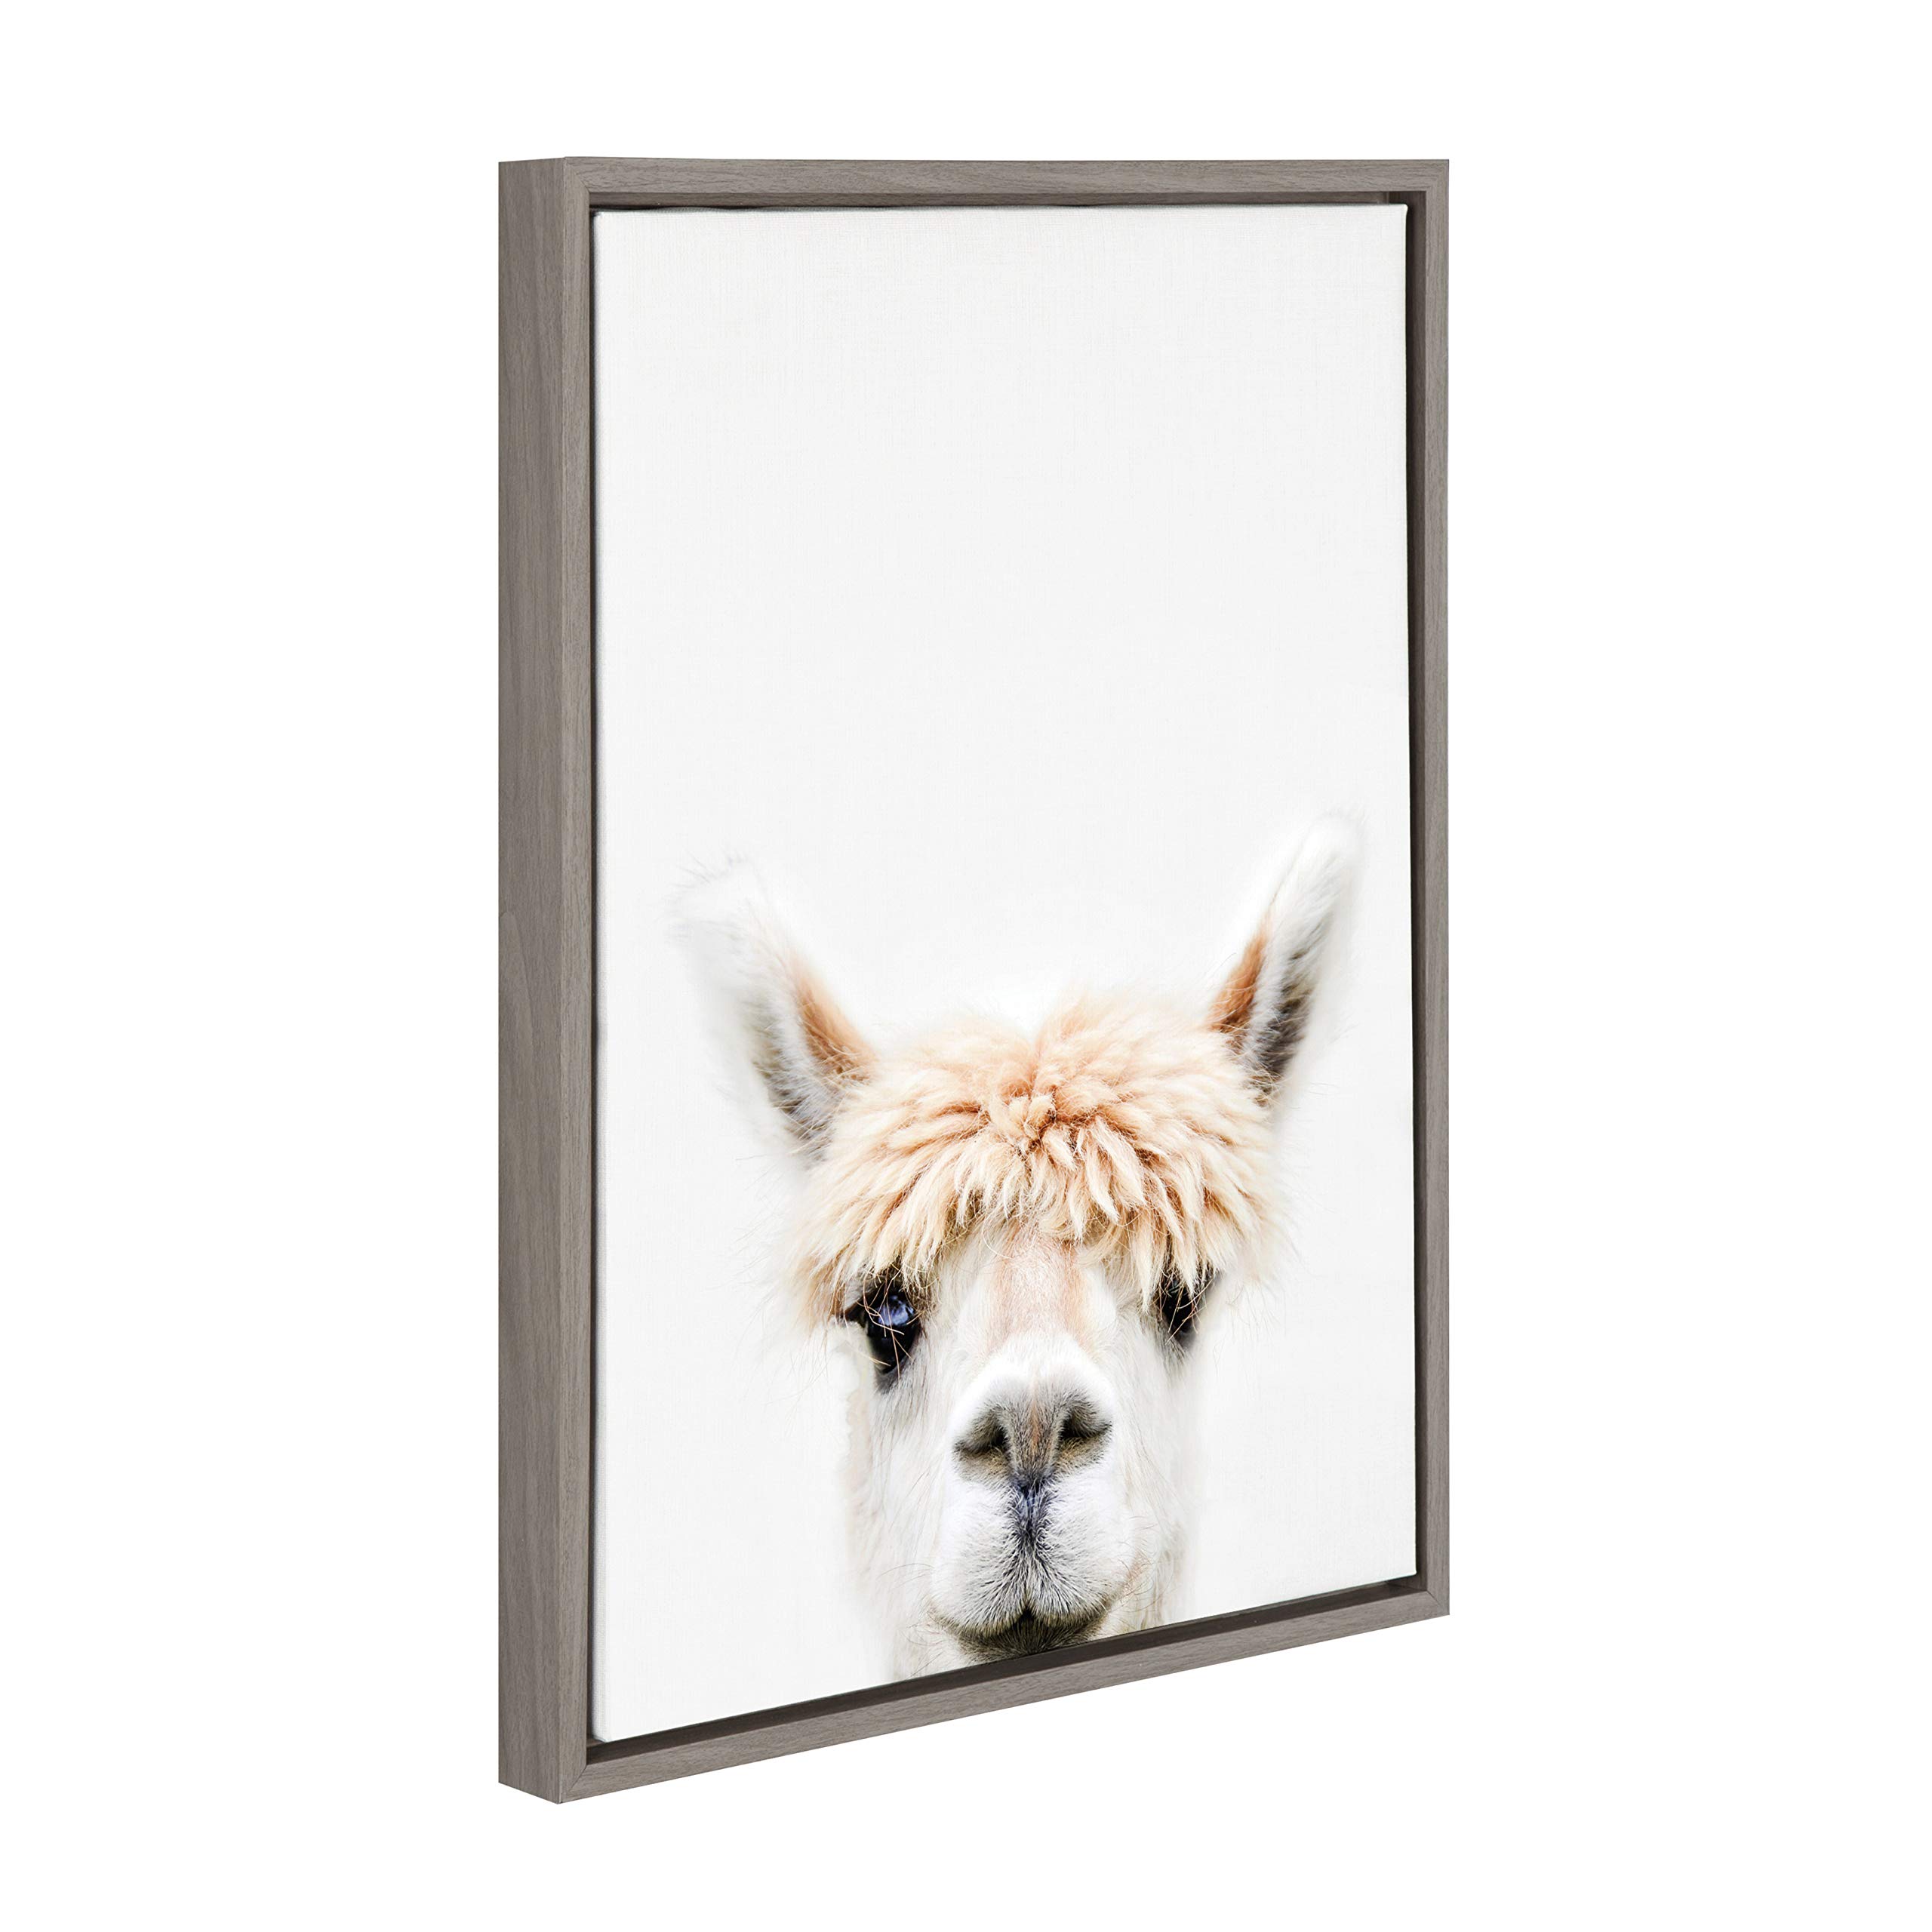 Kate and Laurel Sylvie Alpaca Bangs Animal Print Portrait Framed Canvas Wall Art by Amy Peterson, 18x24 Gray